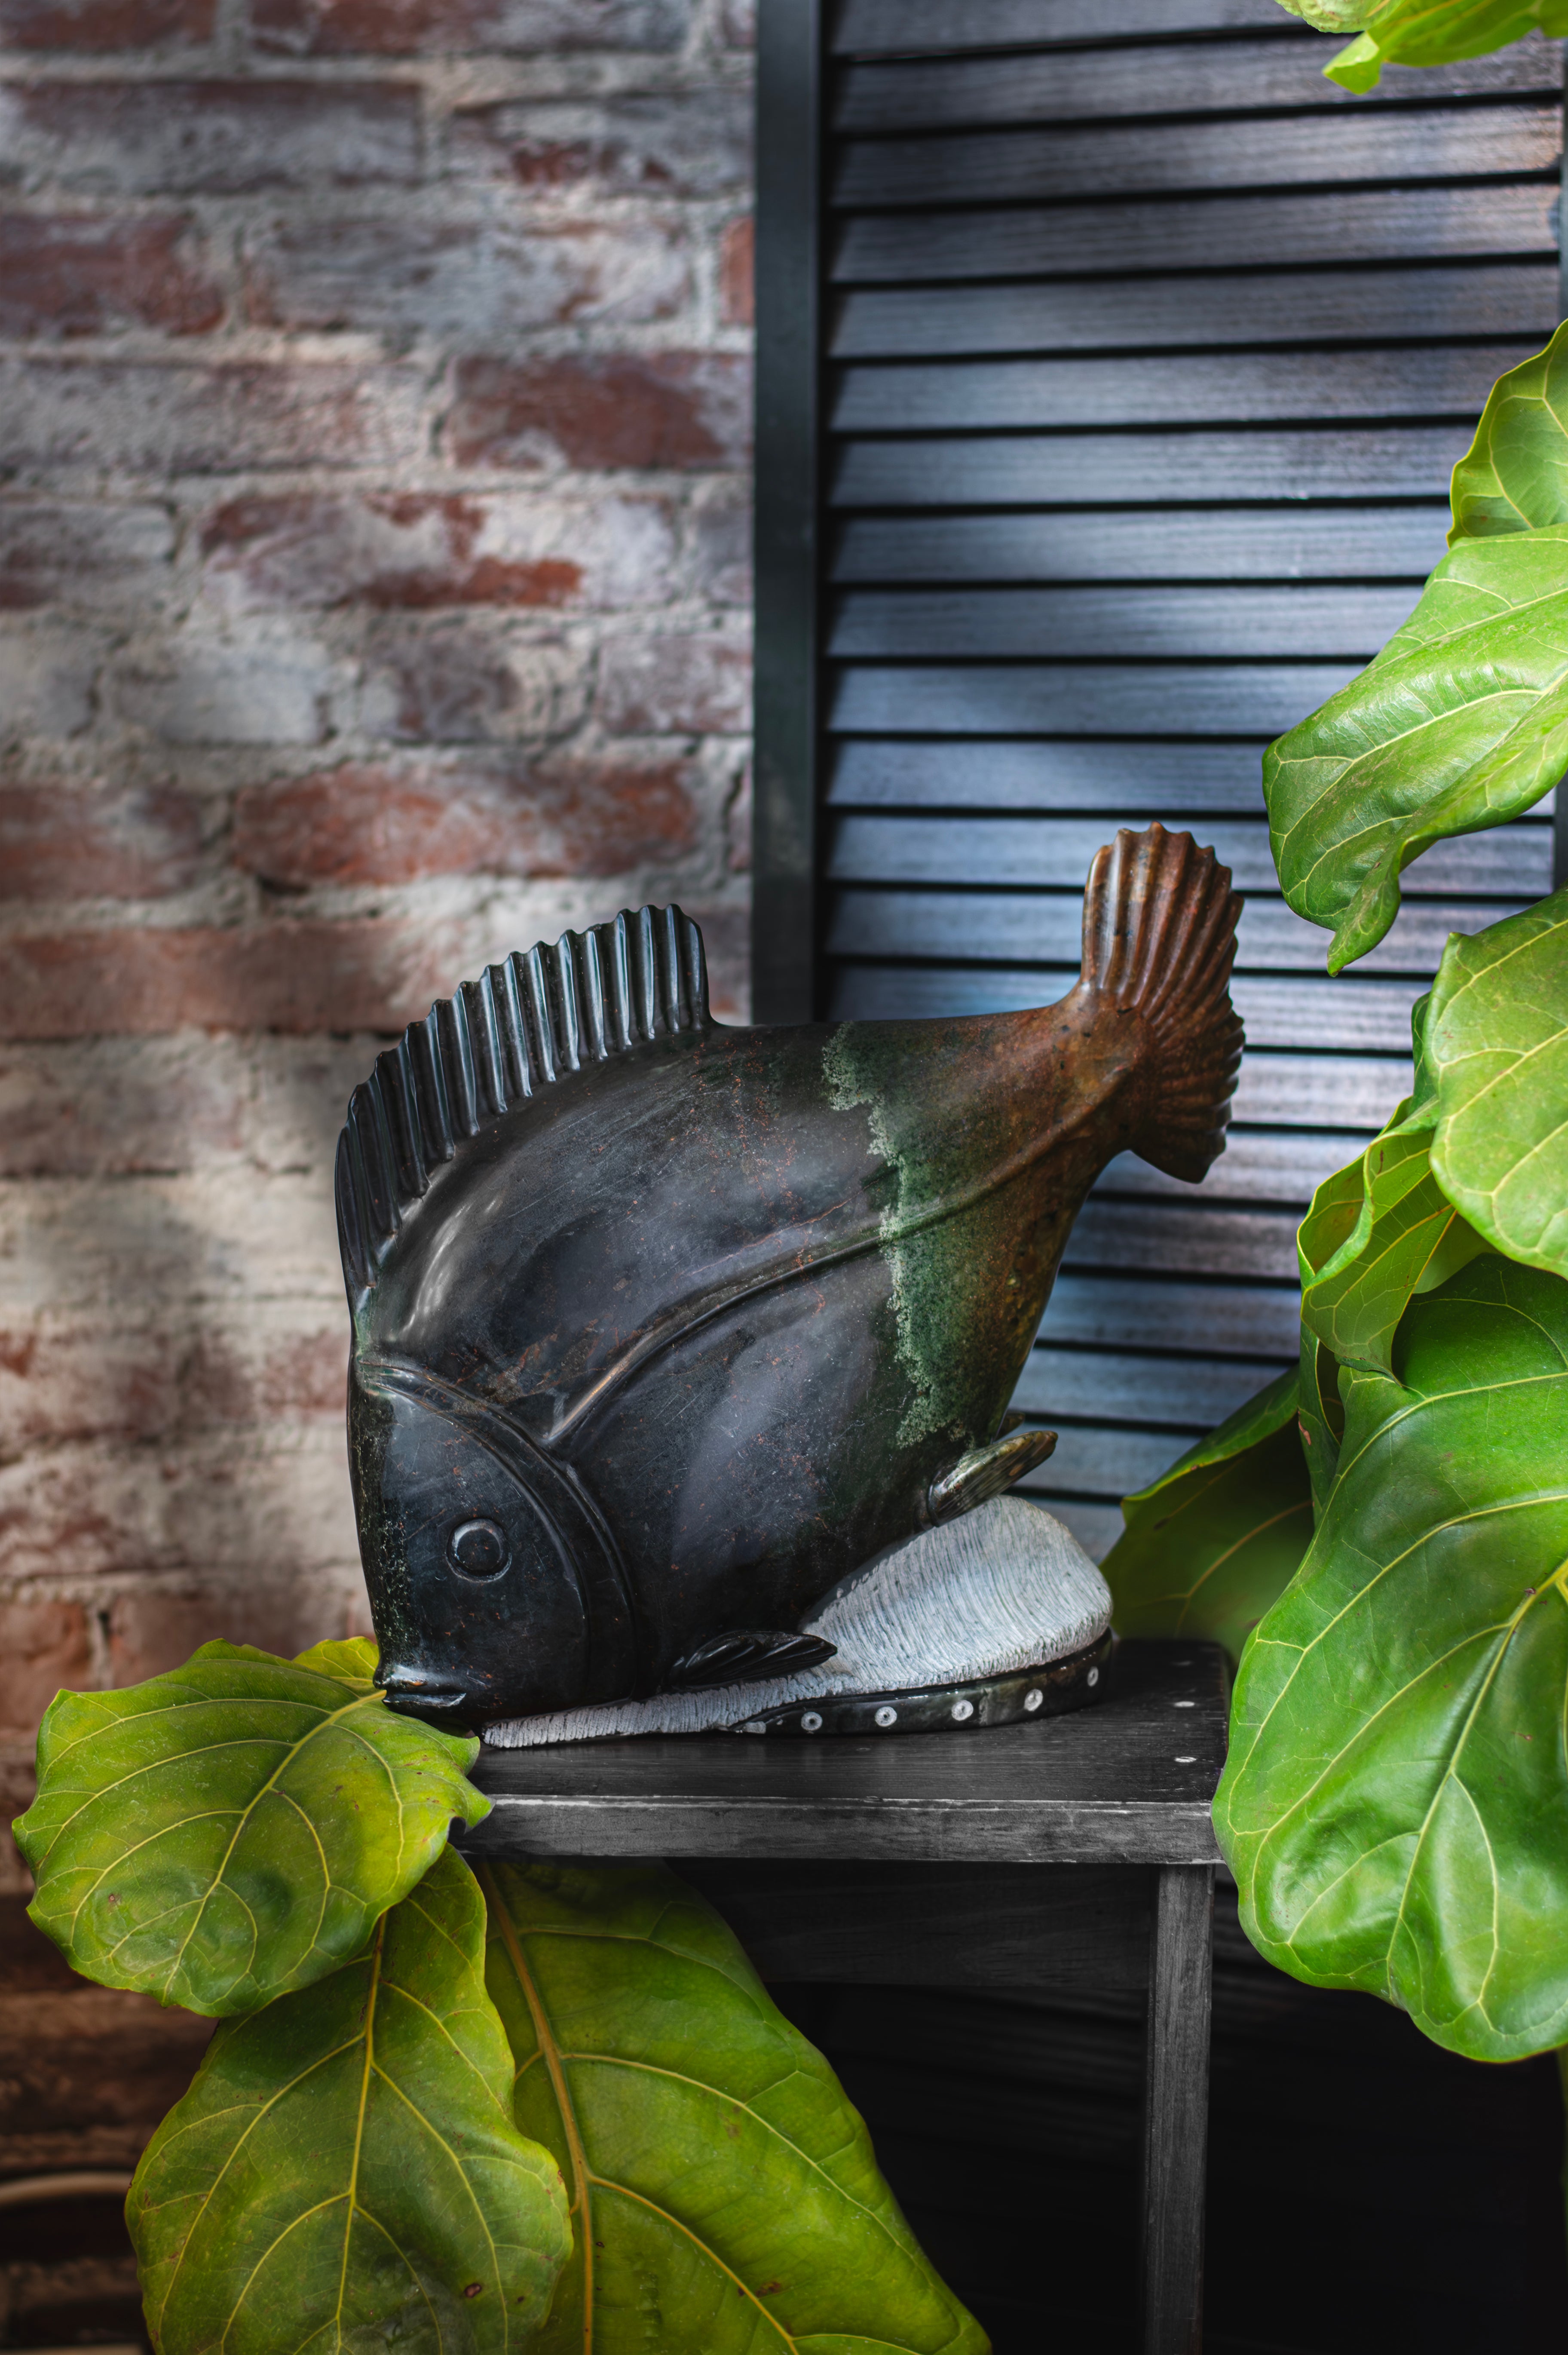 Image of fish sculpture on a black wooden bench in front of a brick wall and black shutter